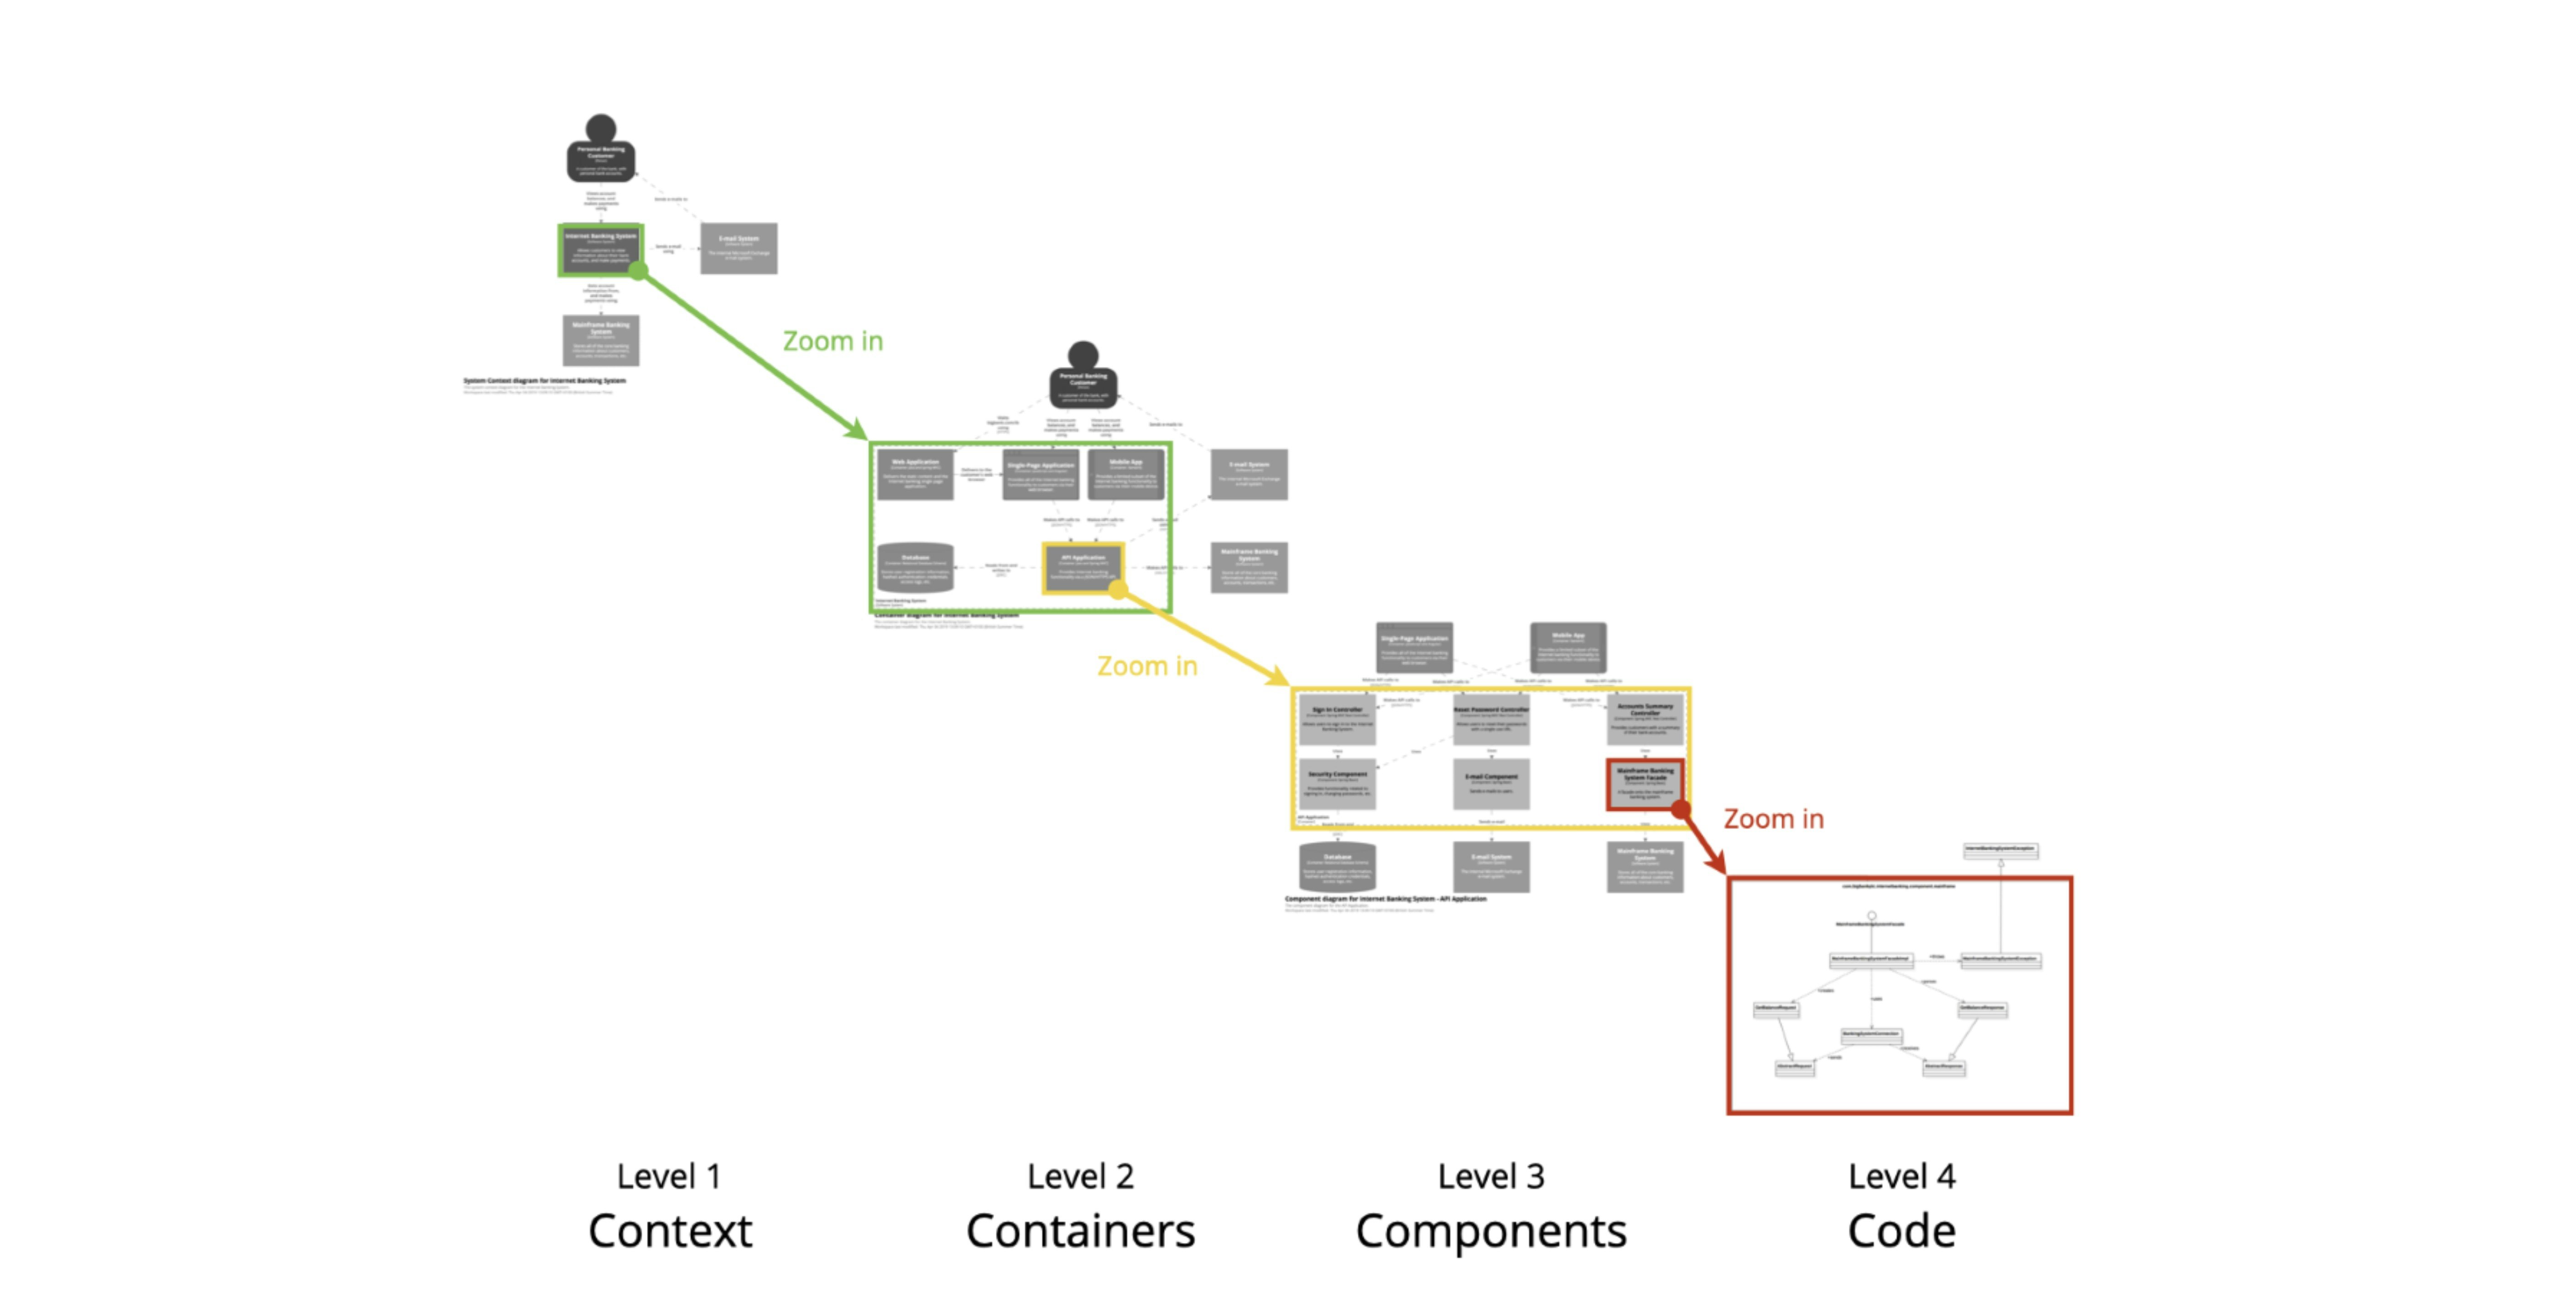 The C4 model for visualising software architecture (Source: C4 model)